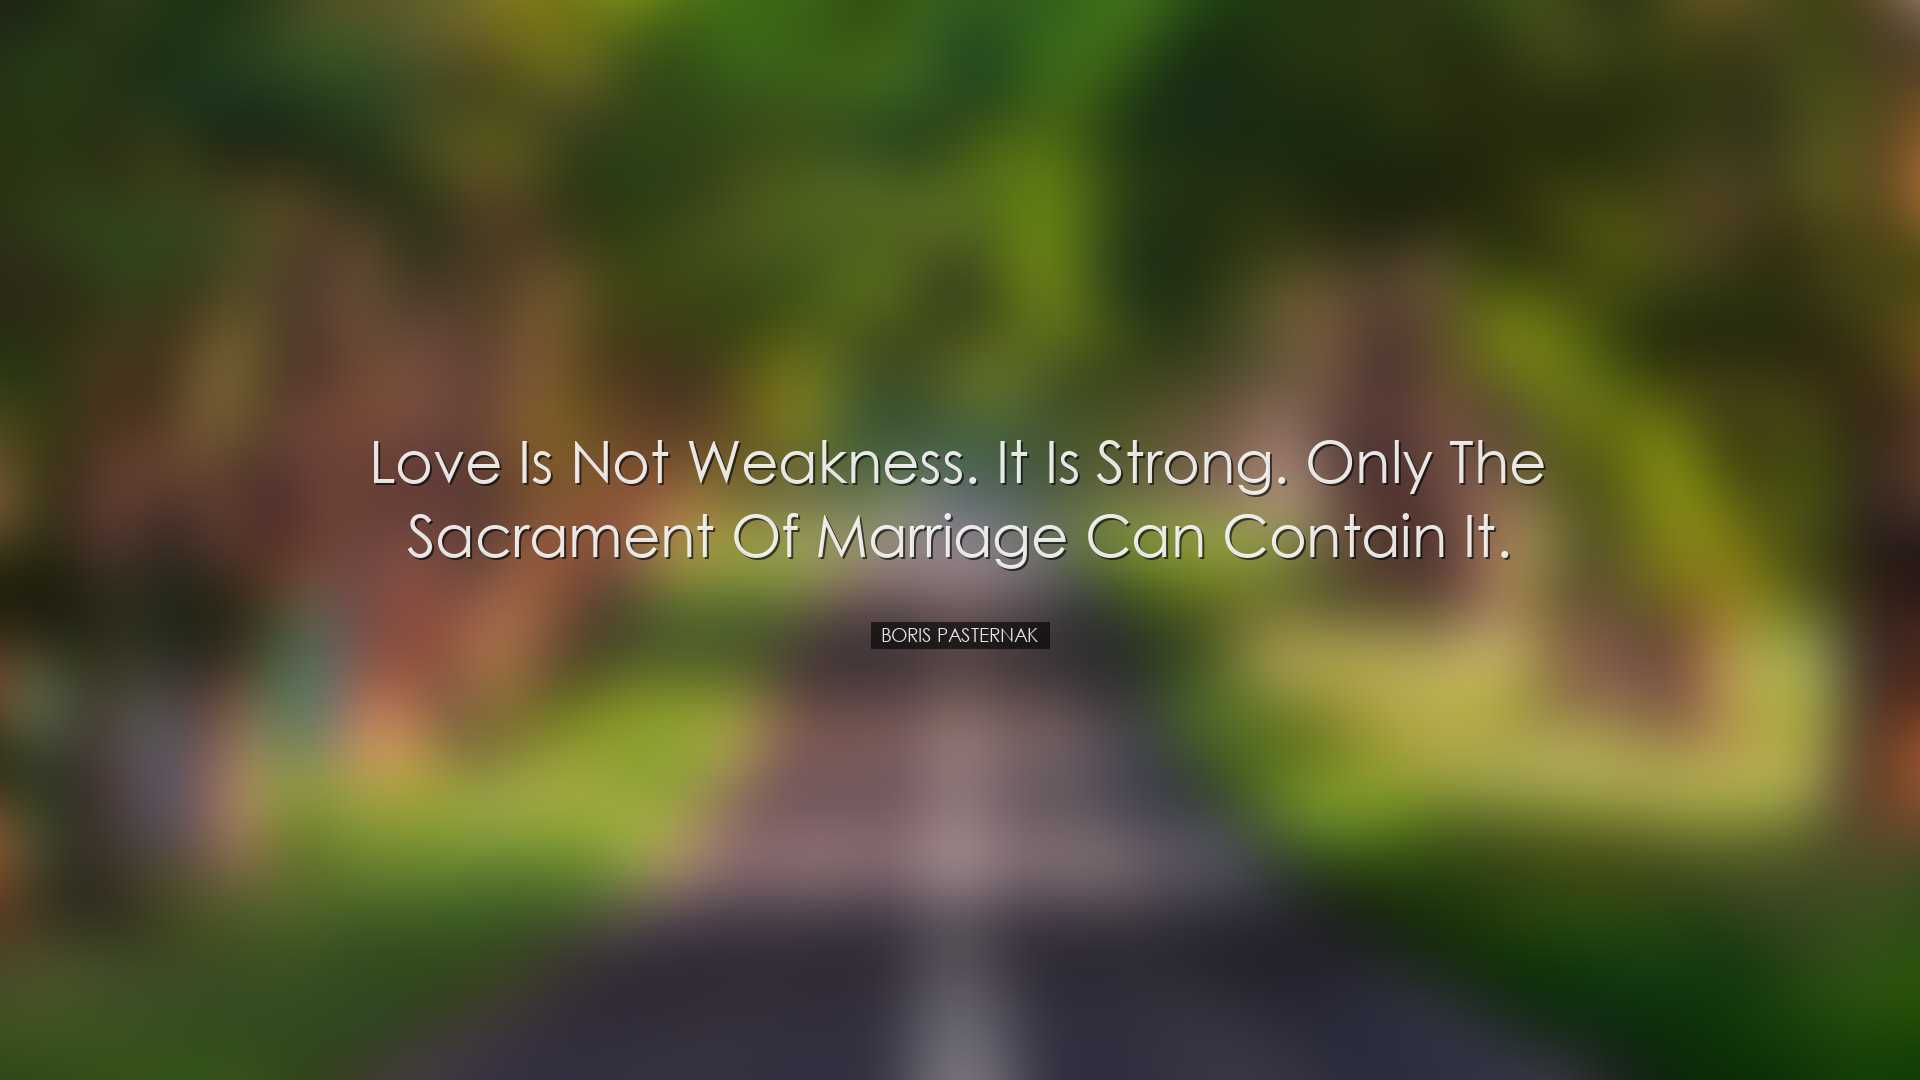 Love is not weakness. It is strong. Only the sacrament of marriage